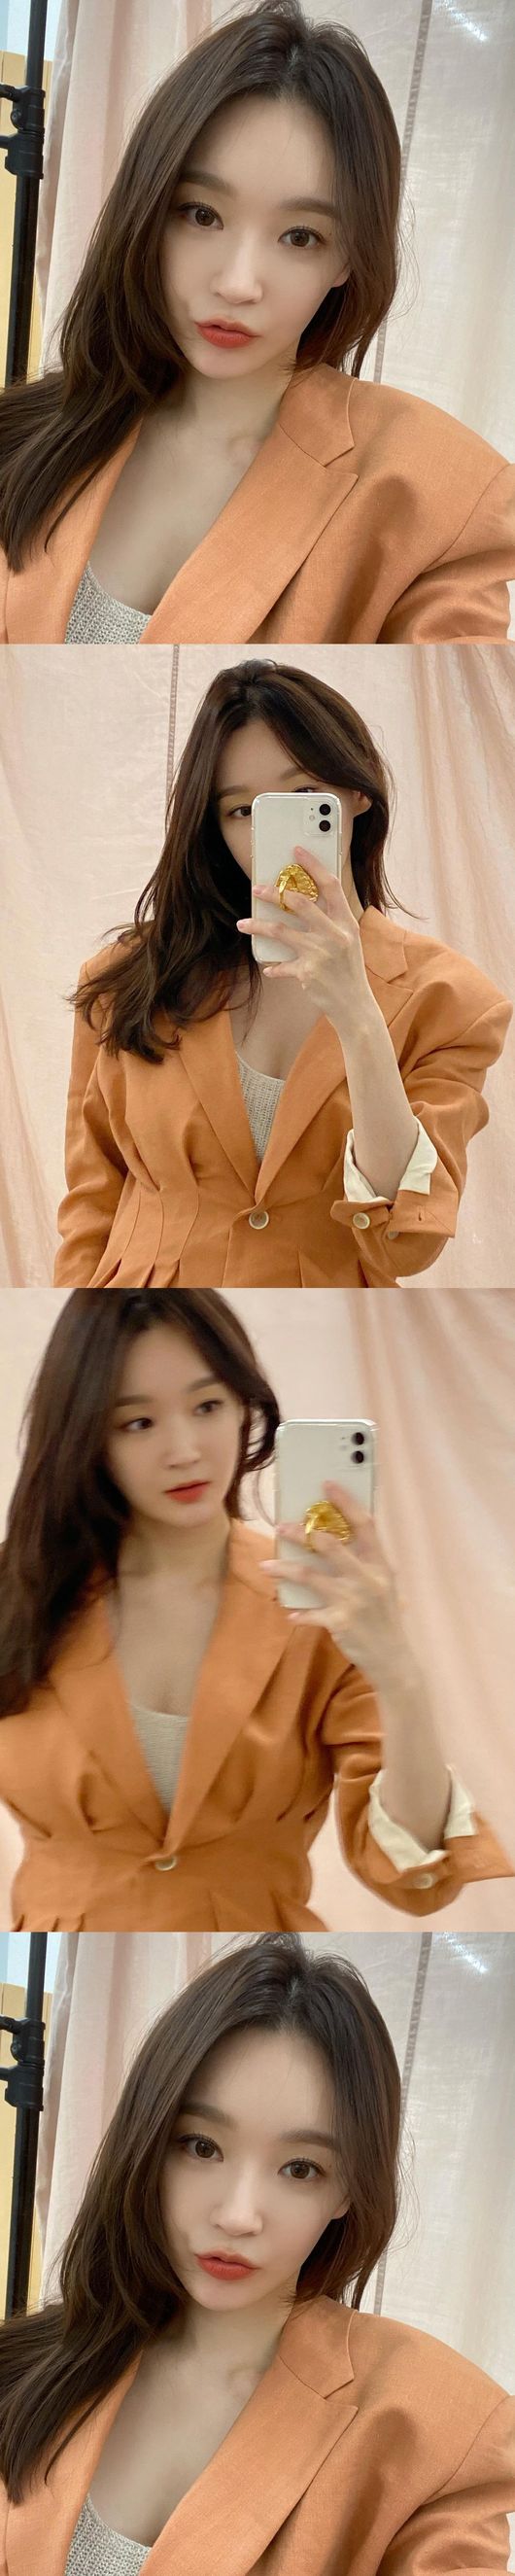 Group Davichi Kang Min-kyung has revealed the current situation.On the 5th, Kang Min-kyung posted several photos on his Instagram with orange emoticons.The photo shows Kang Min-kyung wearing a tangerine suit. Especially Kang Min-kyungs transparent Skins and small features attract attention.On the other hand, group Davichi, which Kang Min-kyung belongs to, released a new song Just hug on the 12th of last month.Davichi participated in the lyrics directly with the lyrics that he wanted to hug warmly with his love without any excuses or words at the moment when he met again after breaking up.Kang Min-kyung Instagram